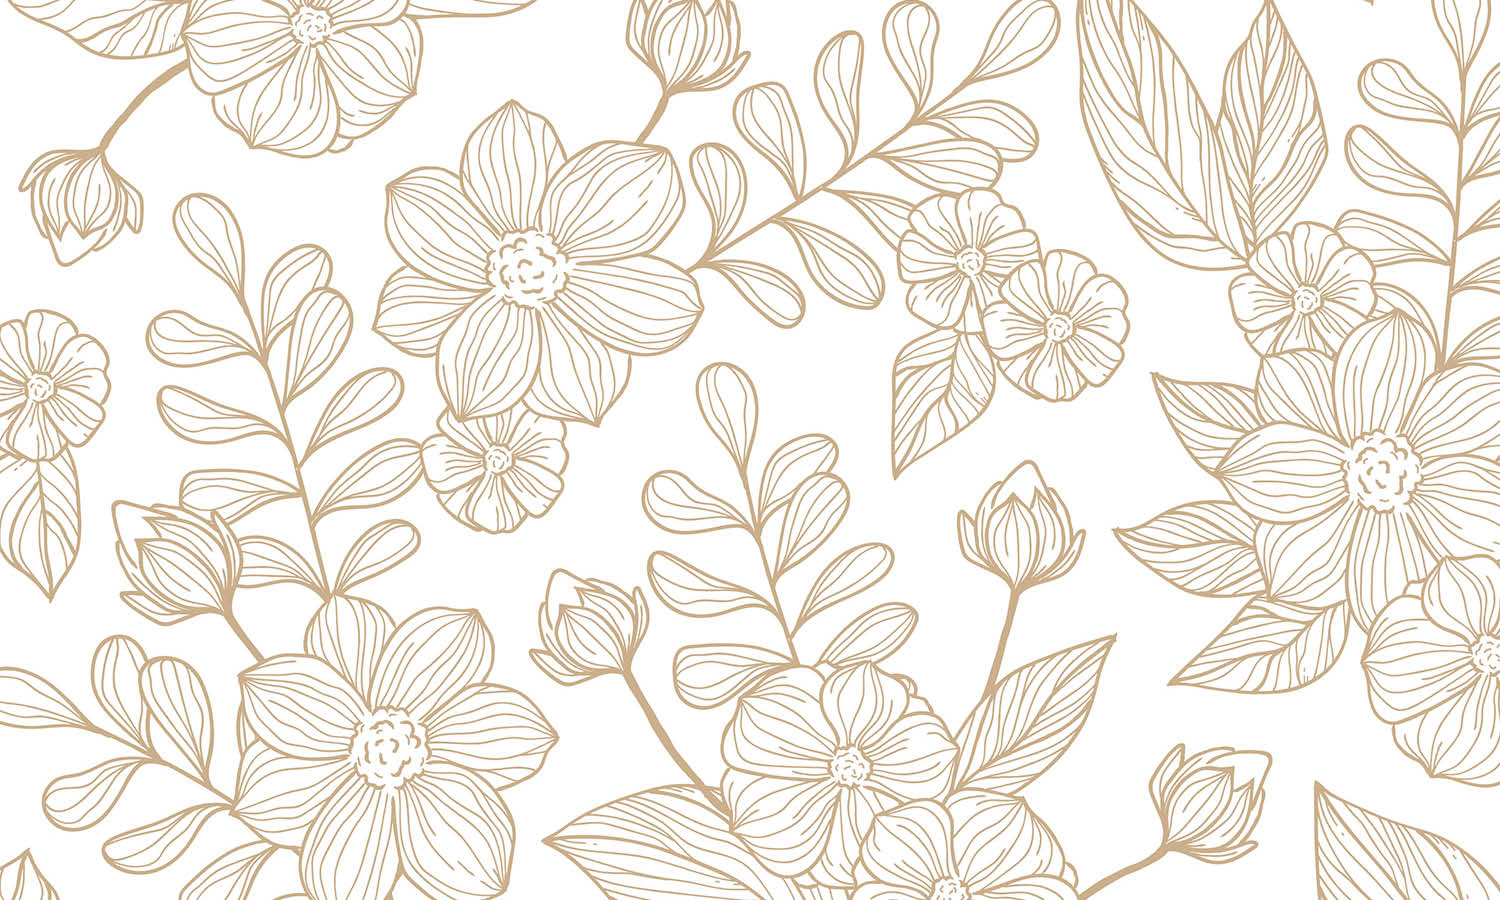 10 Tips on How to Create a Delicate Line Art Floral Illustration